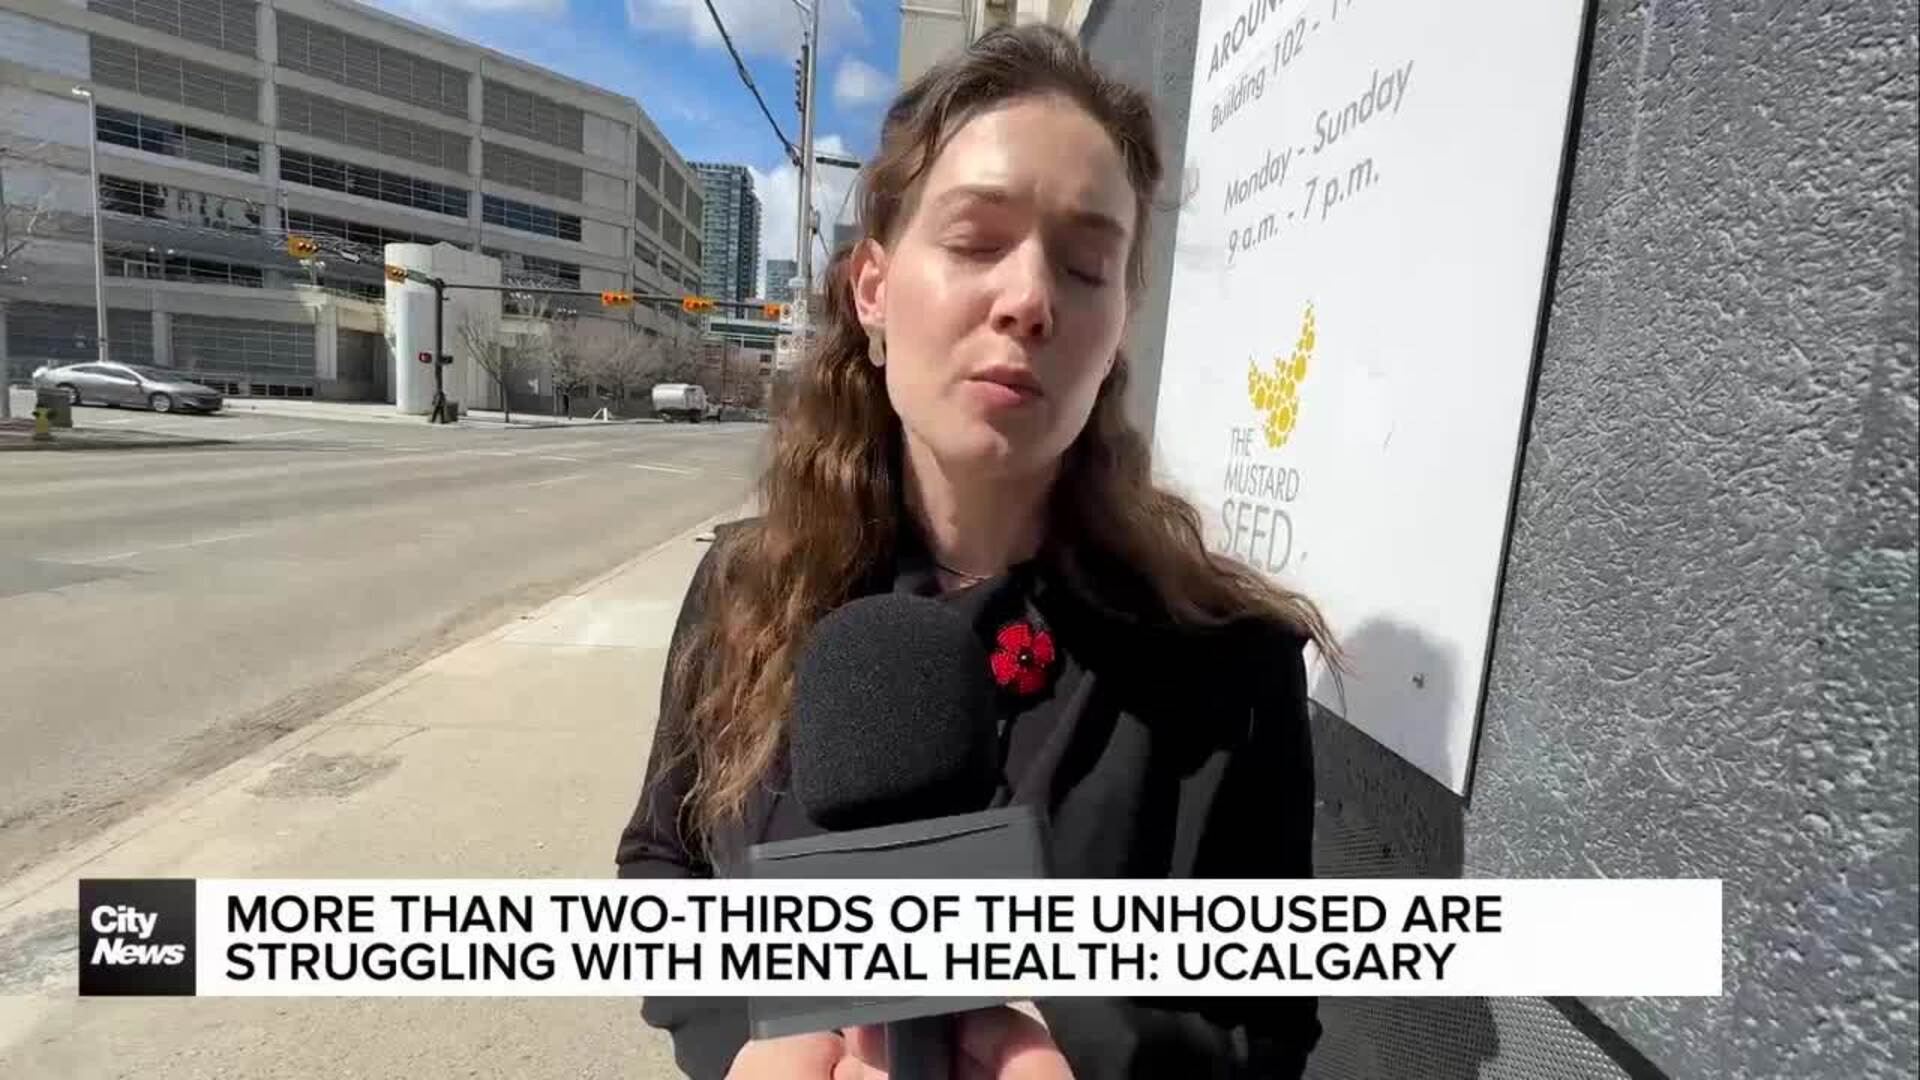 More than two-thirds of the unhoused are struggling with mental health: UCalgary